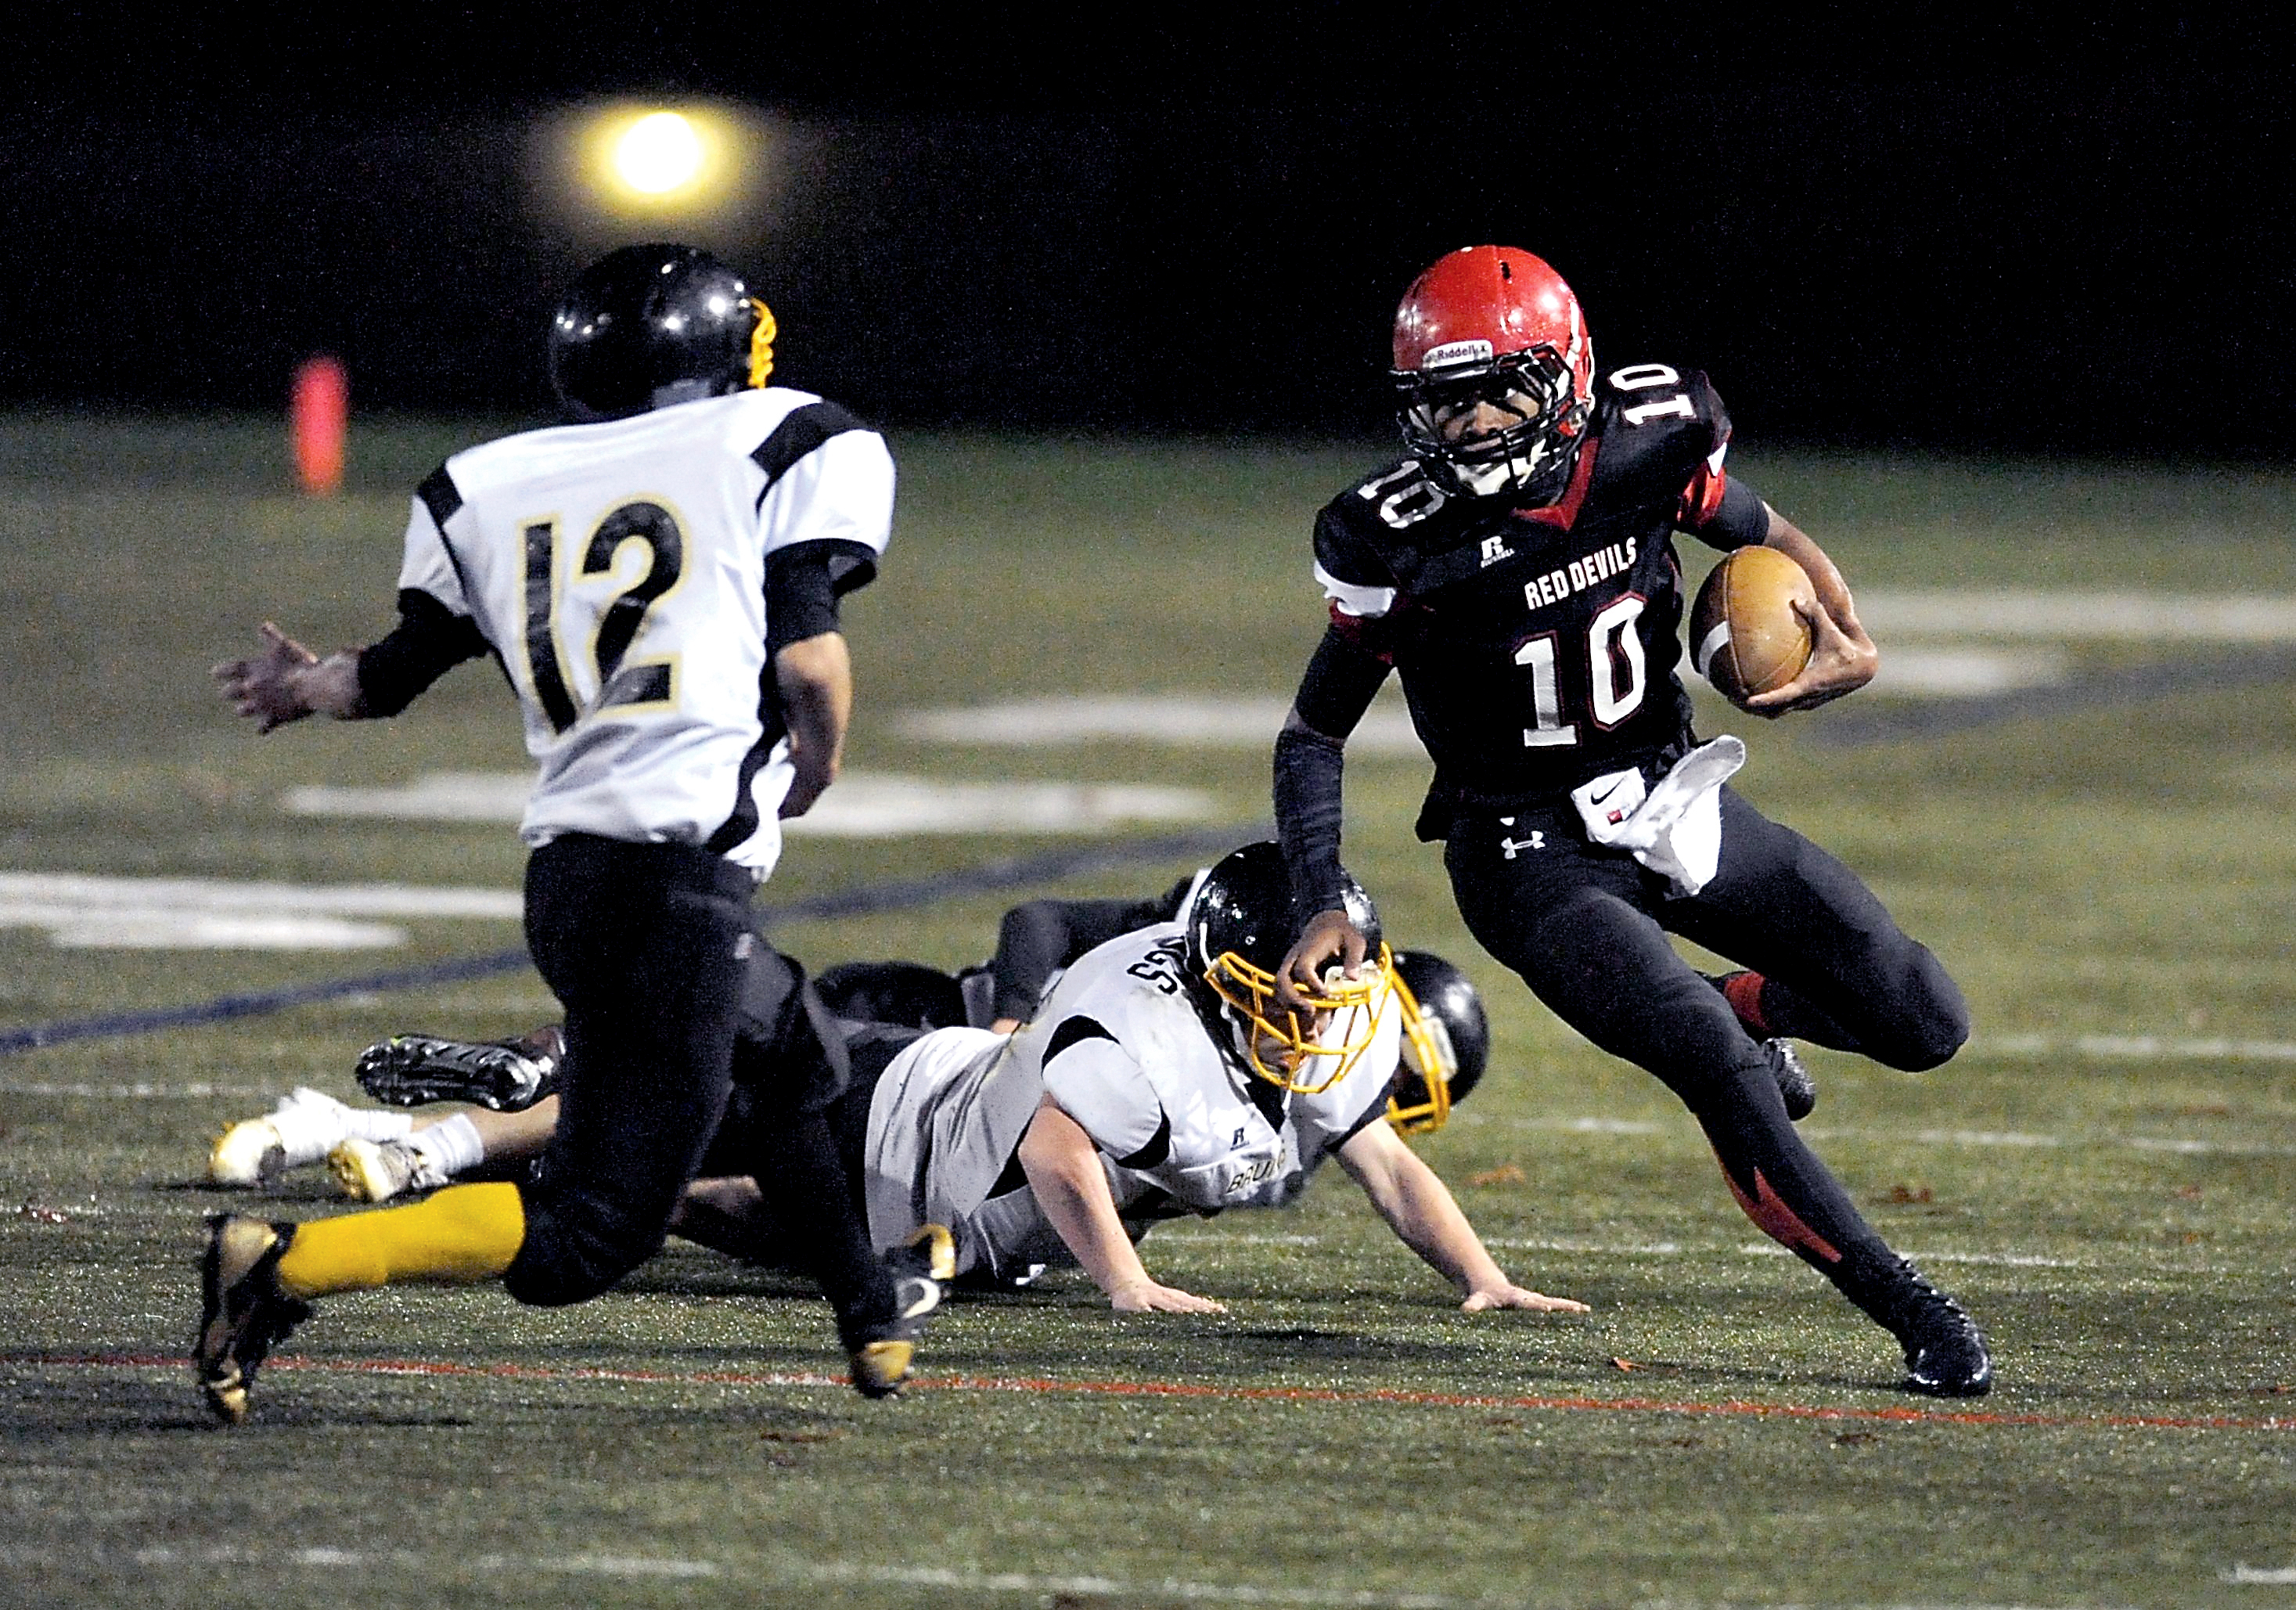 Neah Bay's Rwehabura Munyagi Jr. makes a cut that will get him past Ramon Tinoco (12) during his 33-yard touchdown run in the fourth quarter of the Red Devils' 68-0 state-playoff win over Clallam Bay. Jeff Halstead/for Peninsula Daily News